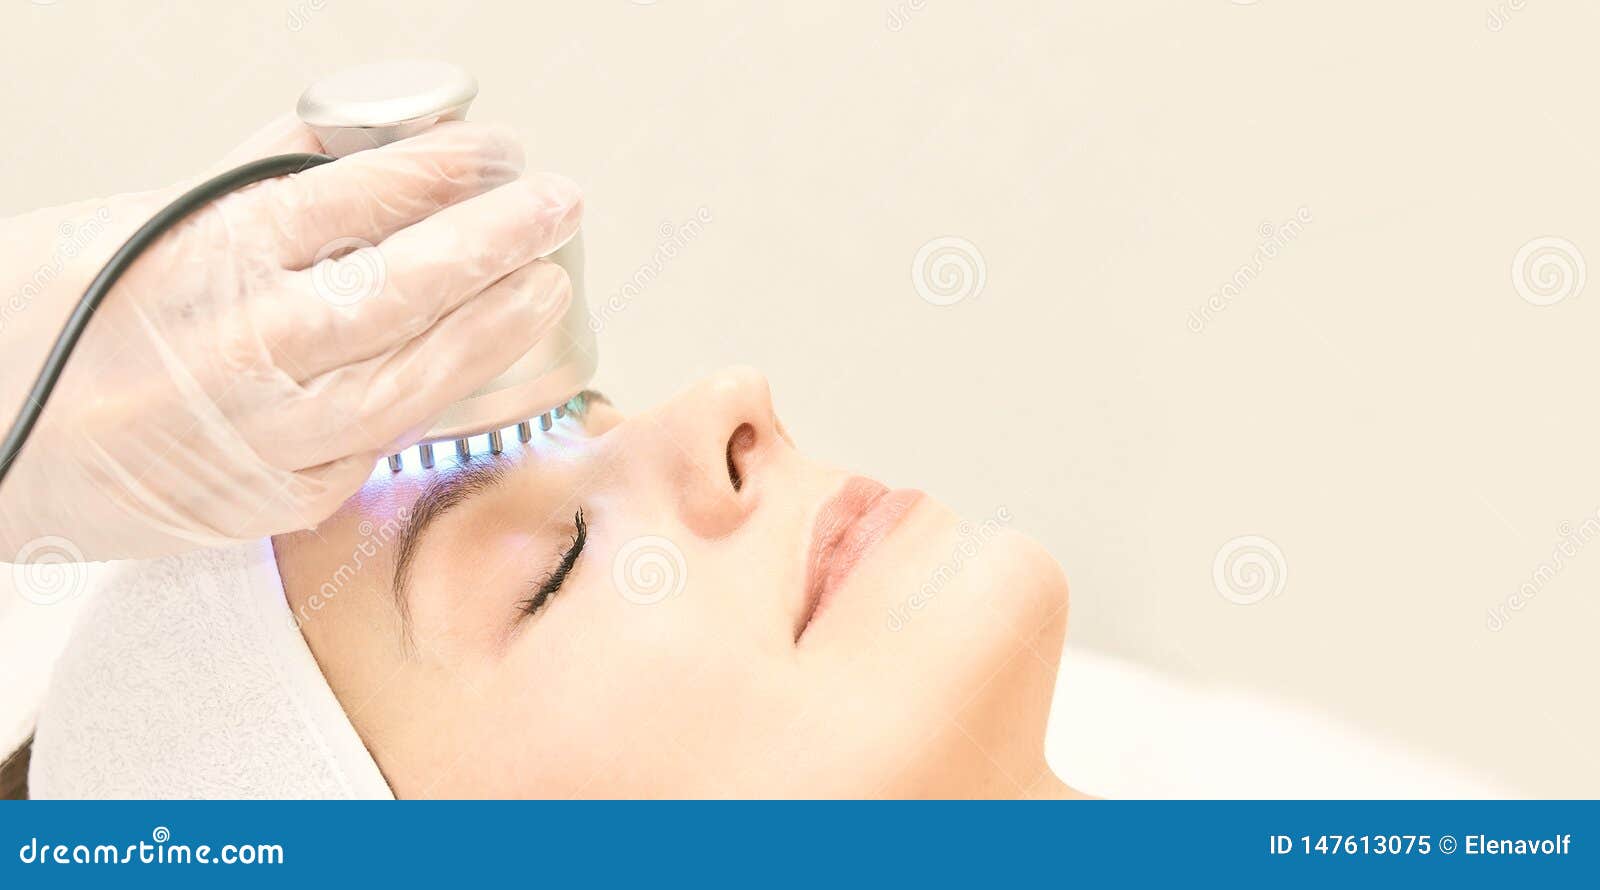 light infrared therapy. cosmetology head procedure. beauty woman face. cosmetic salon device. facial skin rejuvenation